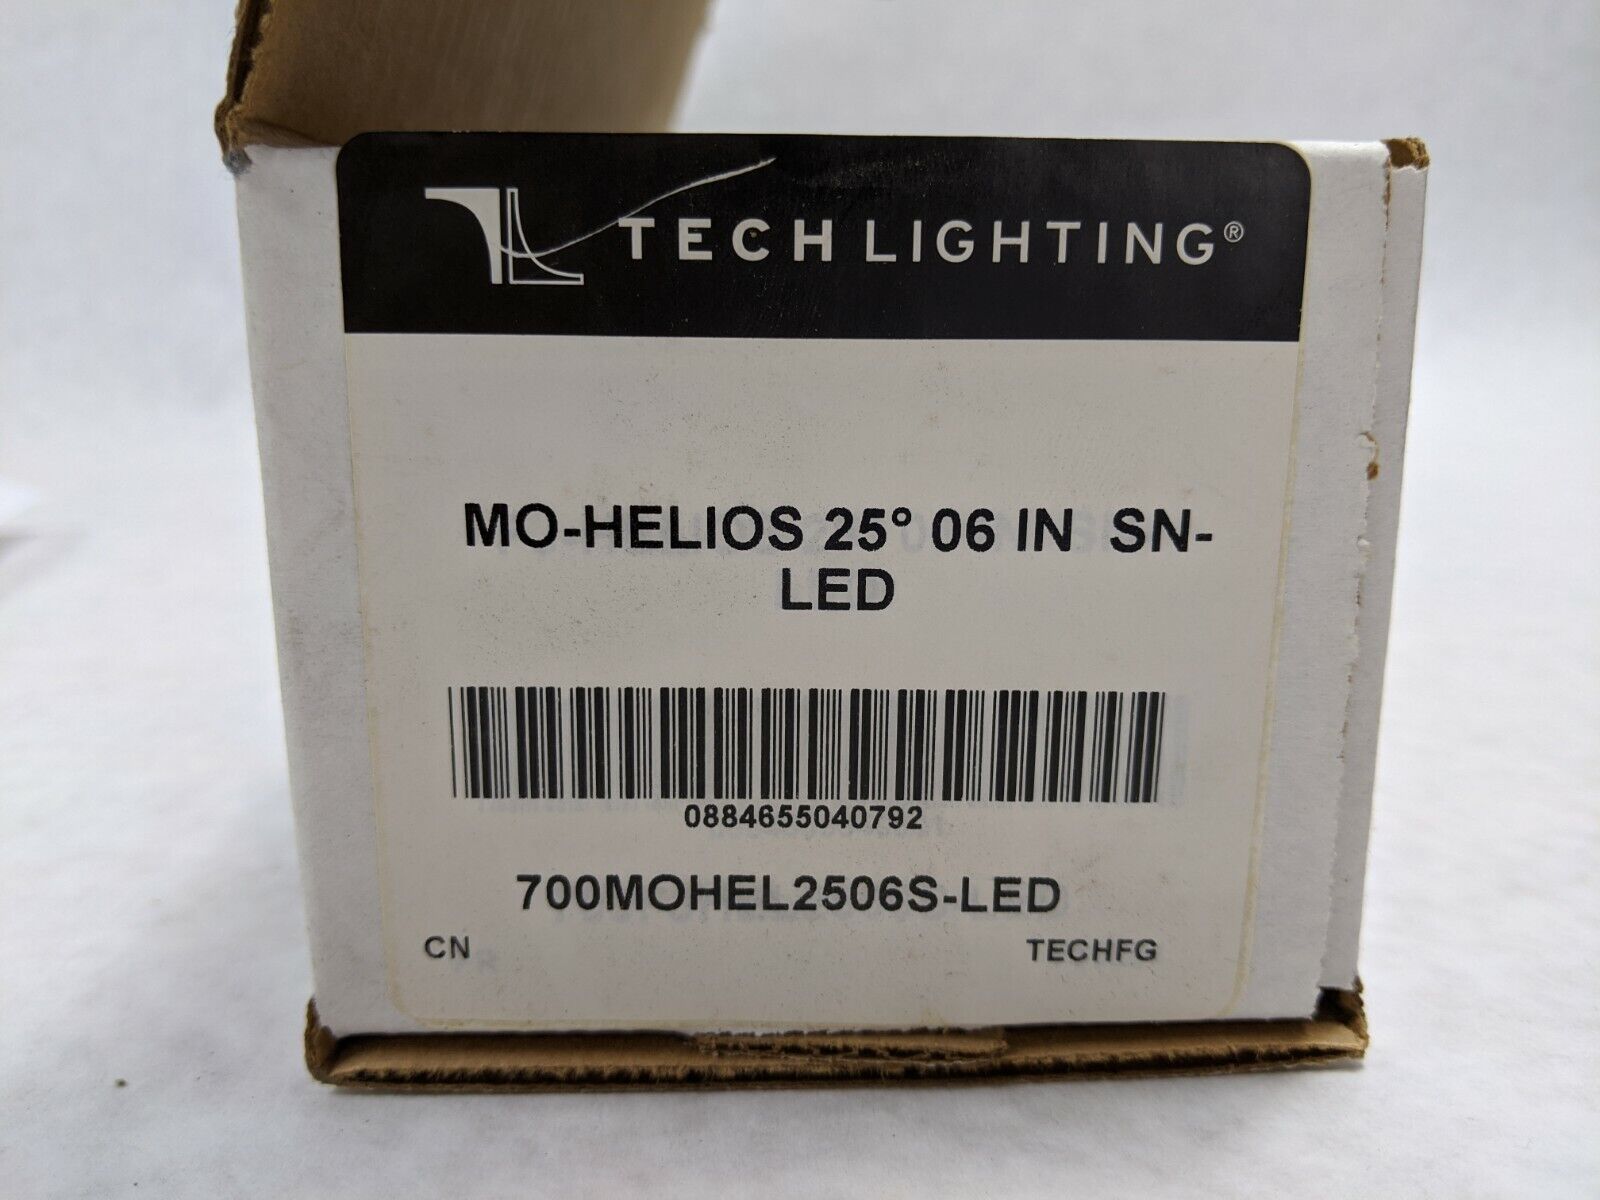 Directional LED Head Tech Lighting MO-HELIOS 25° 06 IN SN-LED 700MOHEL2506S-LED